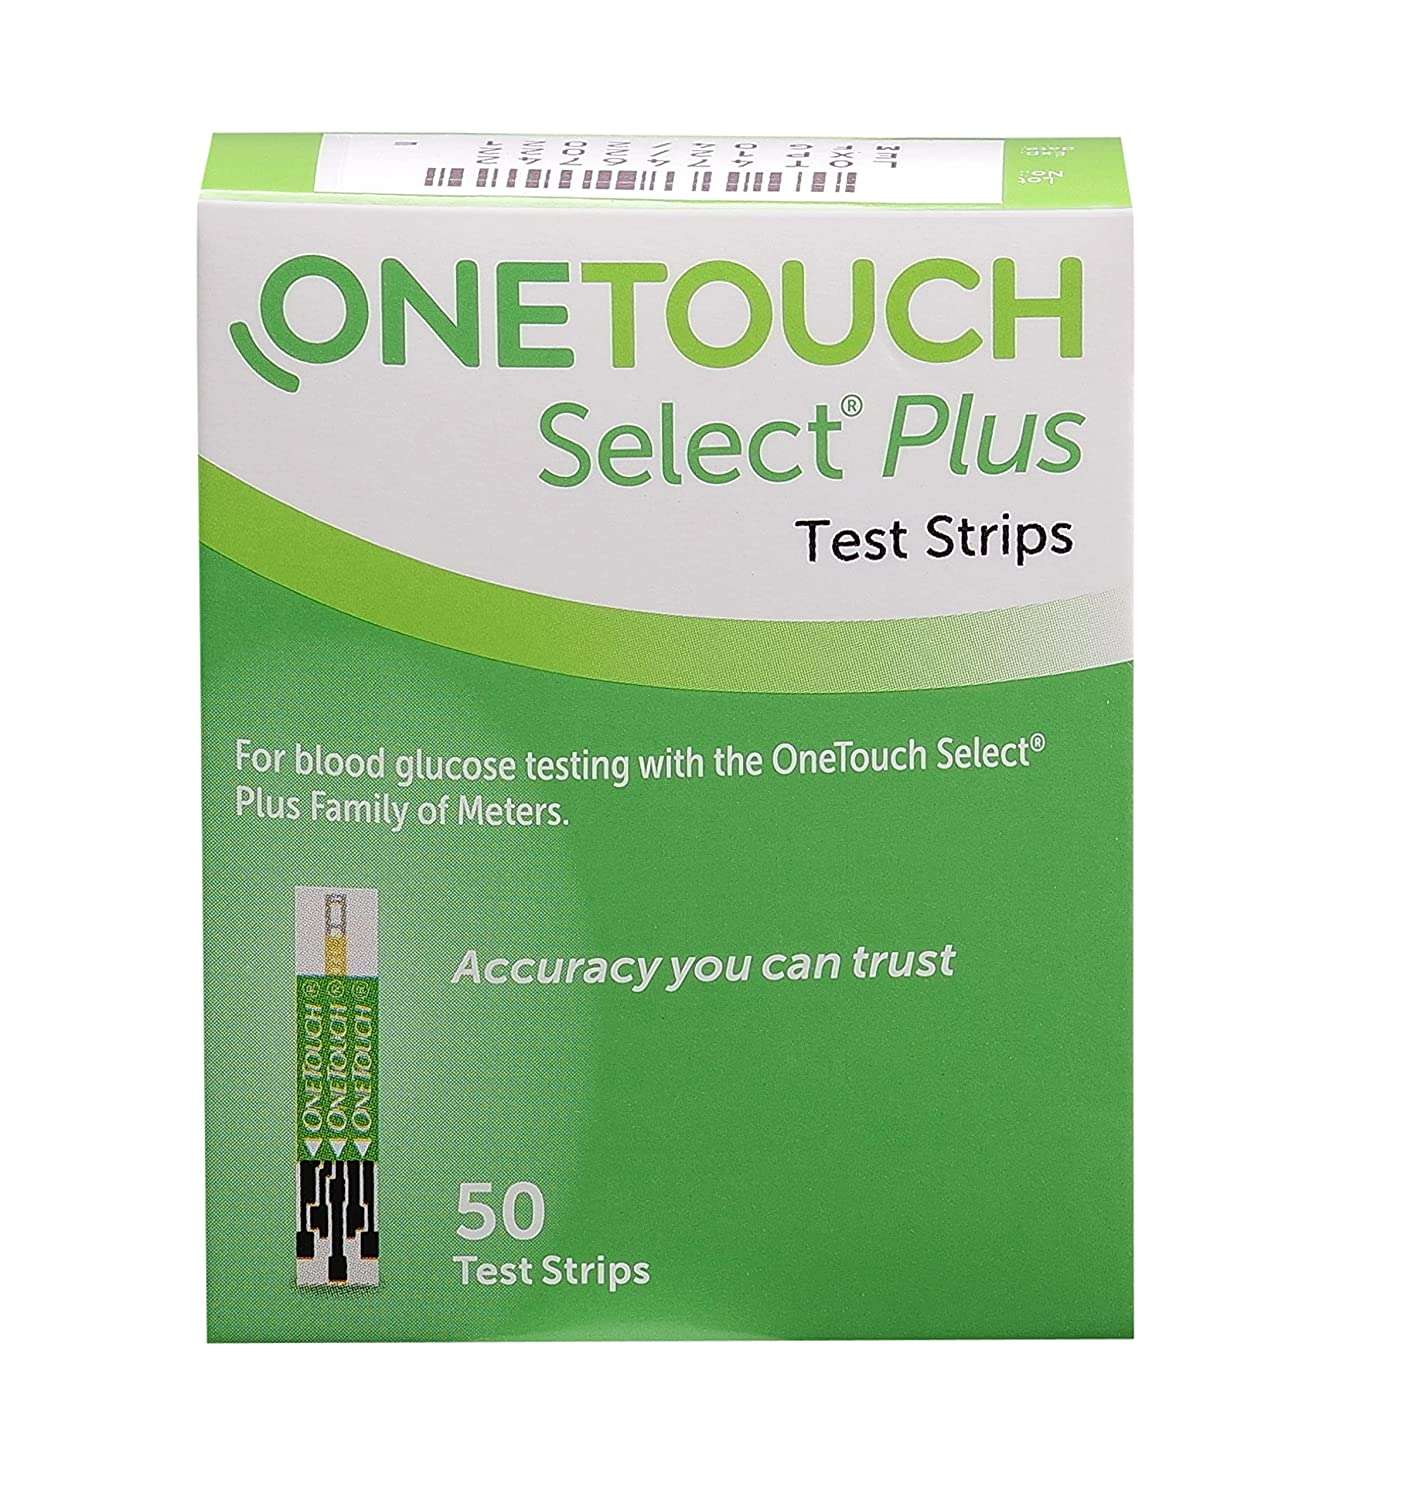 OneTouch select simple blood glucose monitoring strips